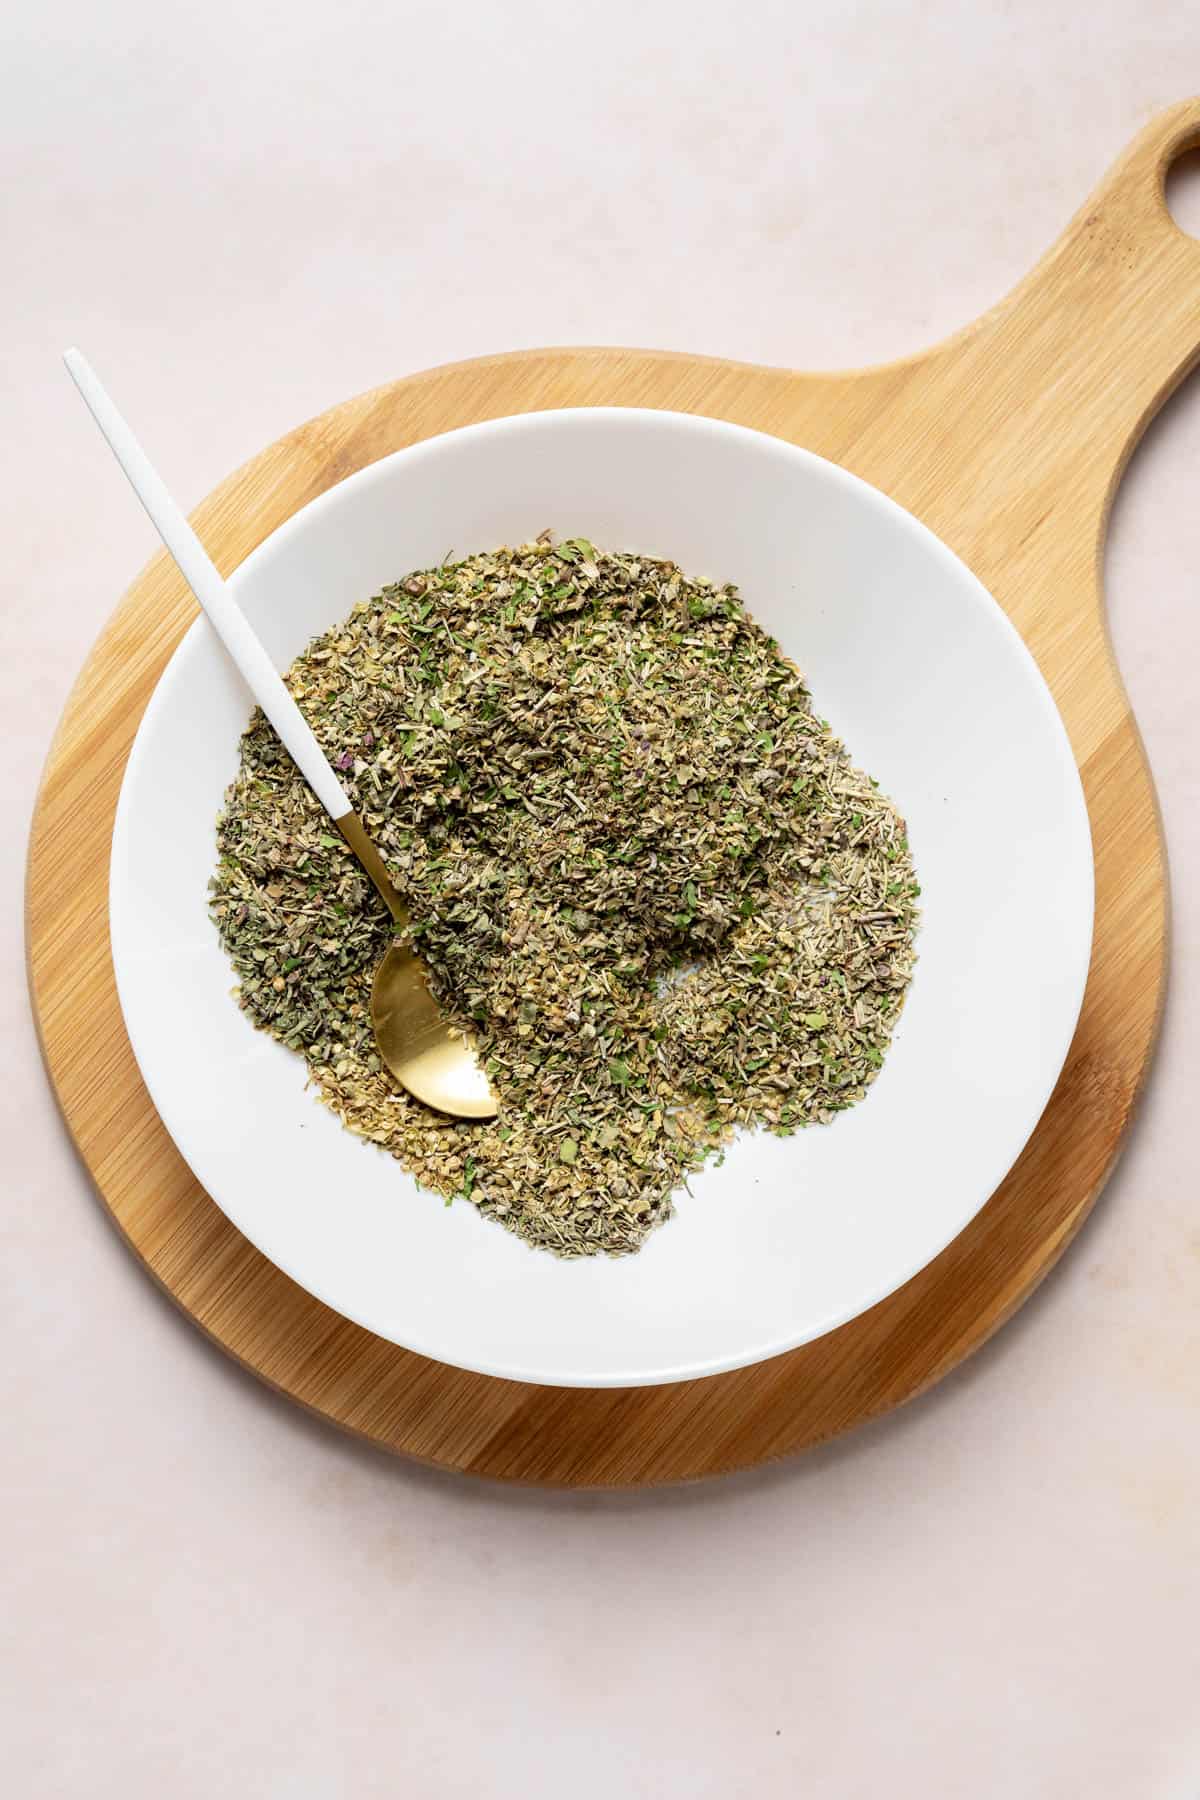 Herbs mixed together in a shallow white bowl with a spoon.